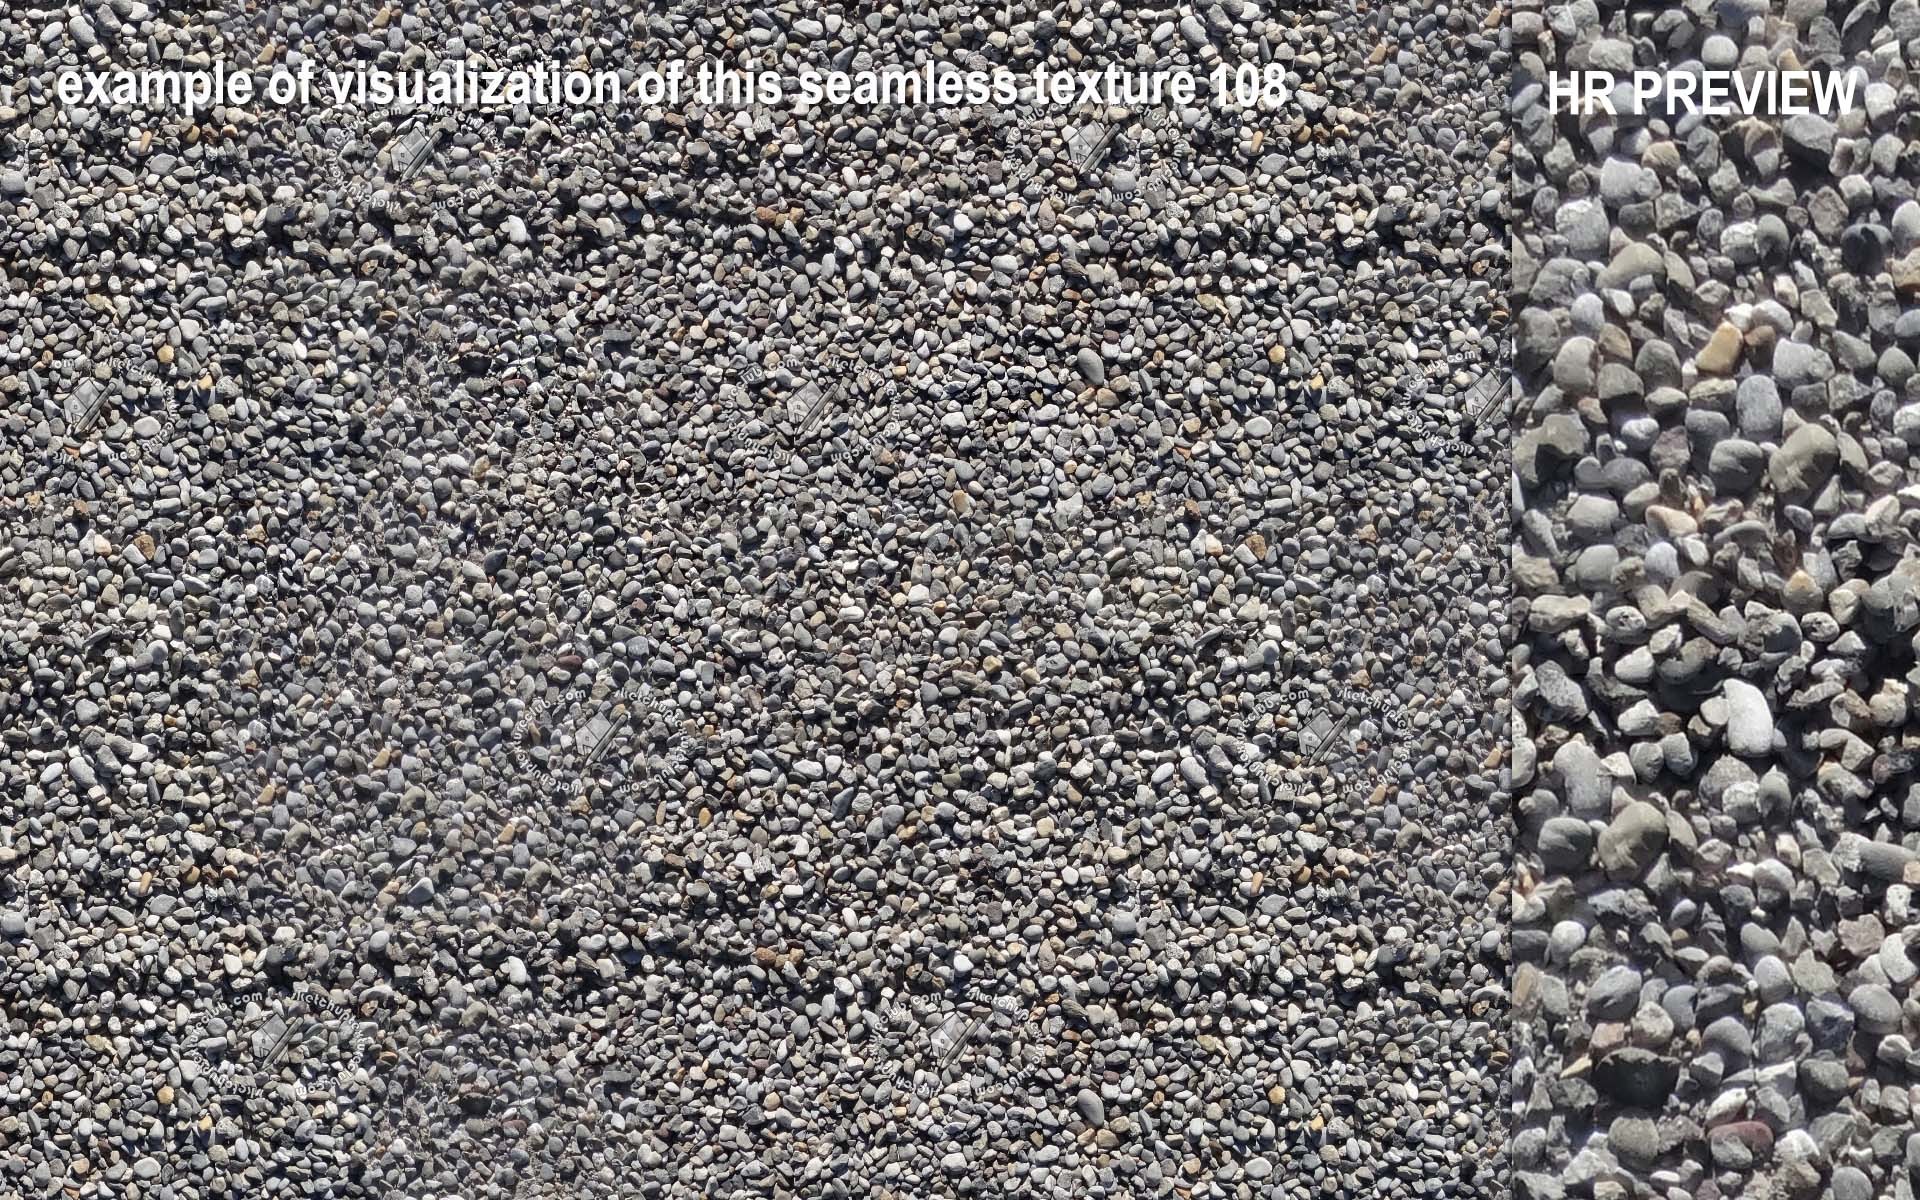 108 -example of visualization of this seamless texture